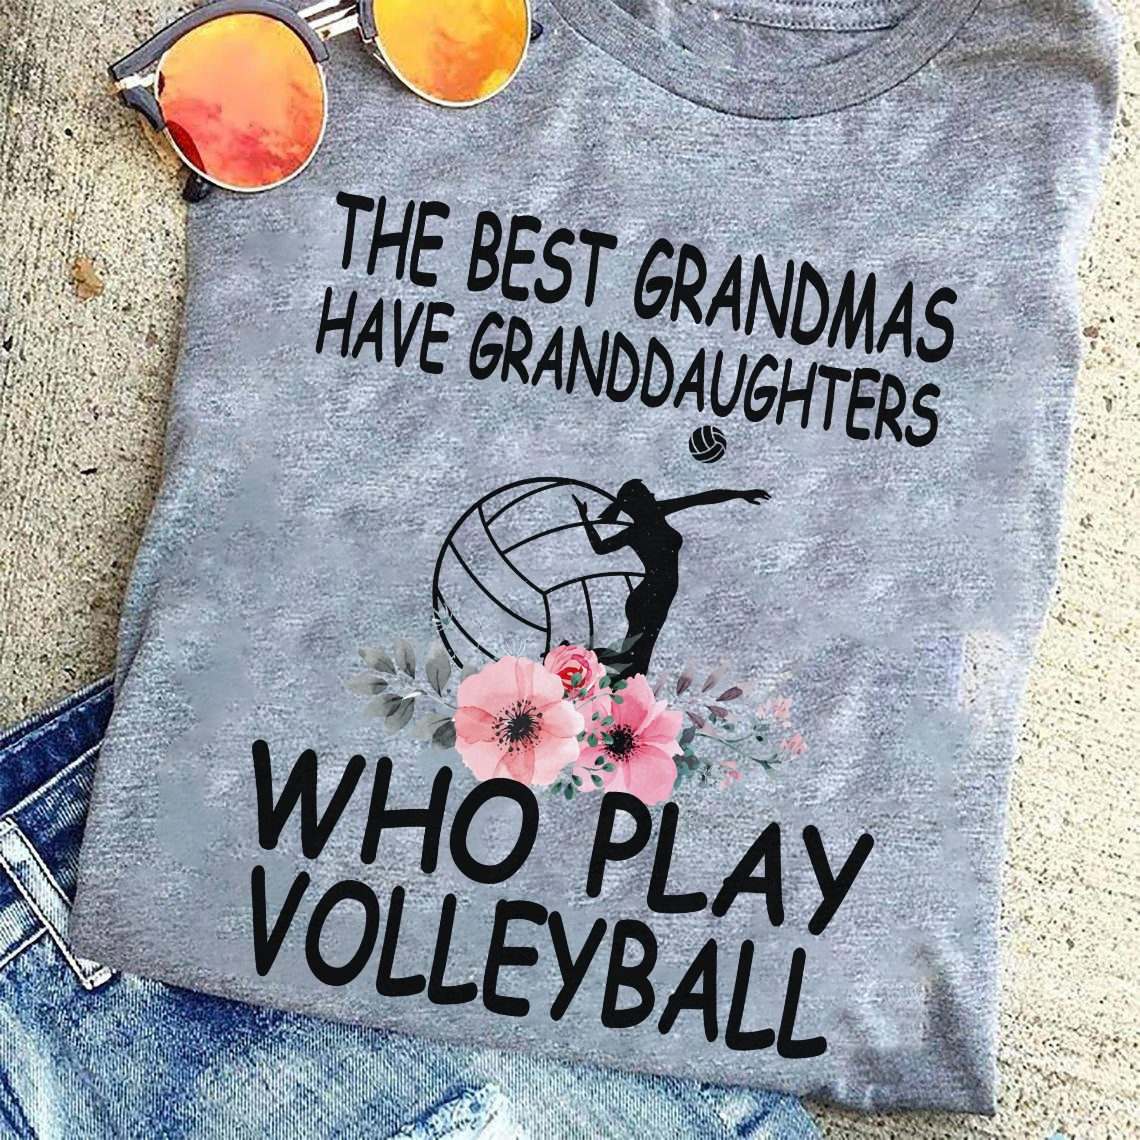 The best grandmas have granddaughters who play volleyball - Volleyball player